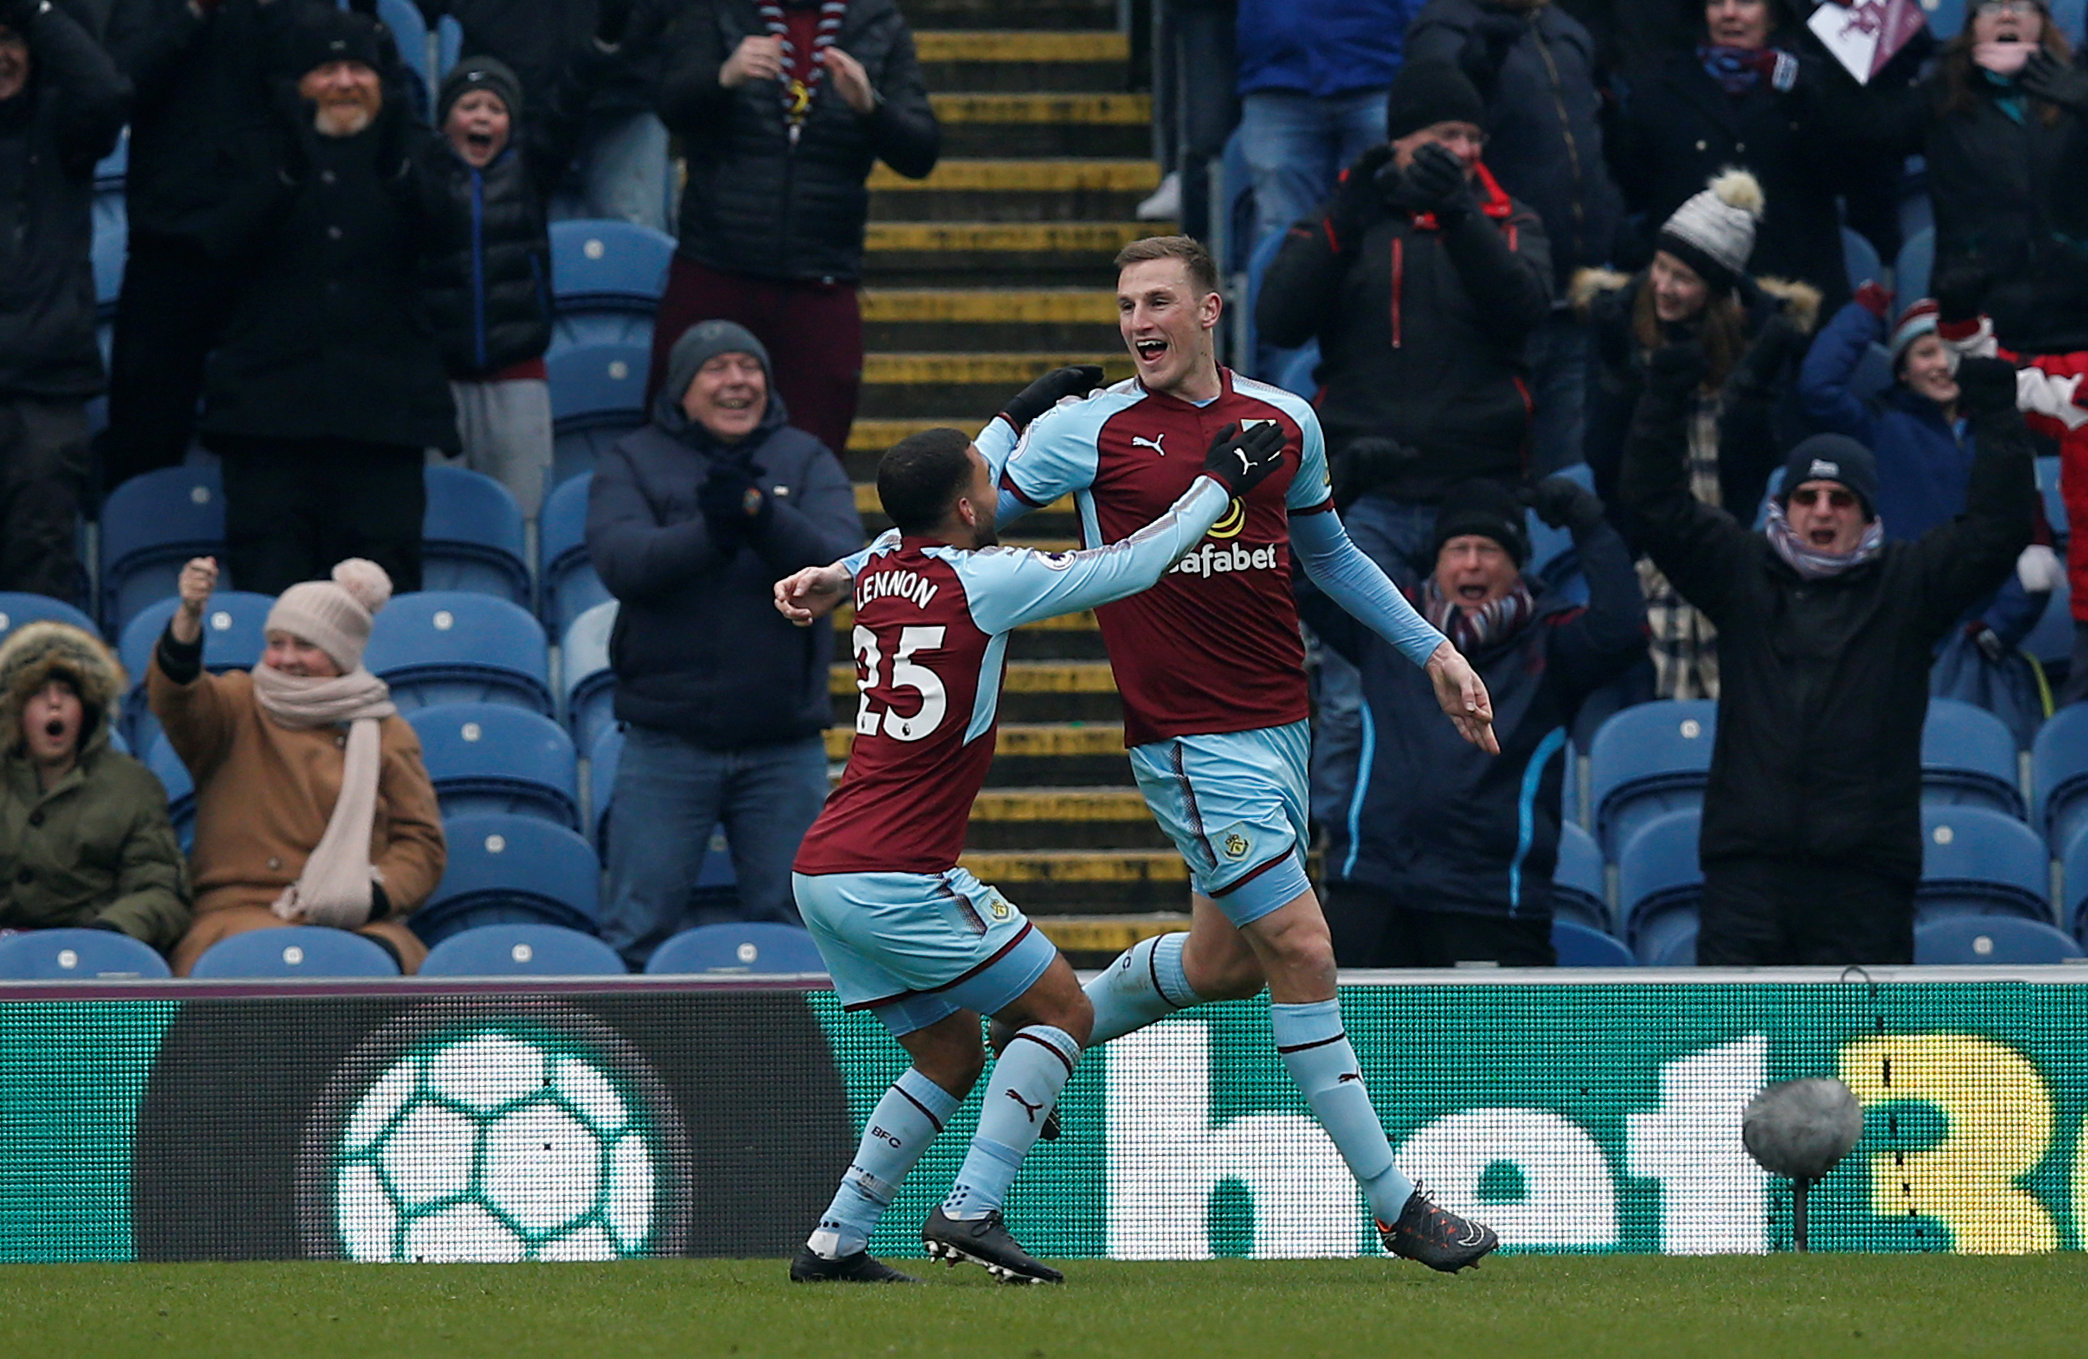 Football: Wood header gives Burnley late win over Everton